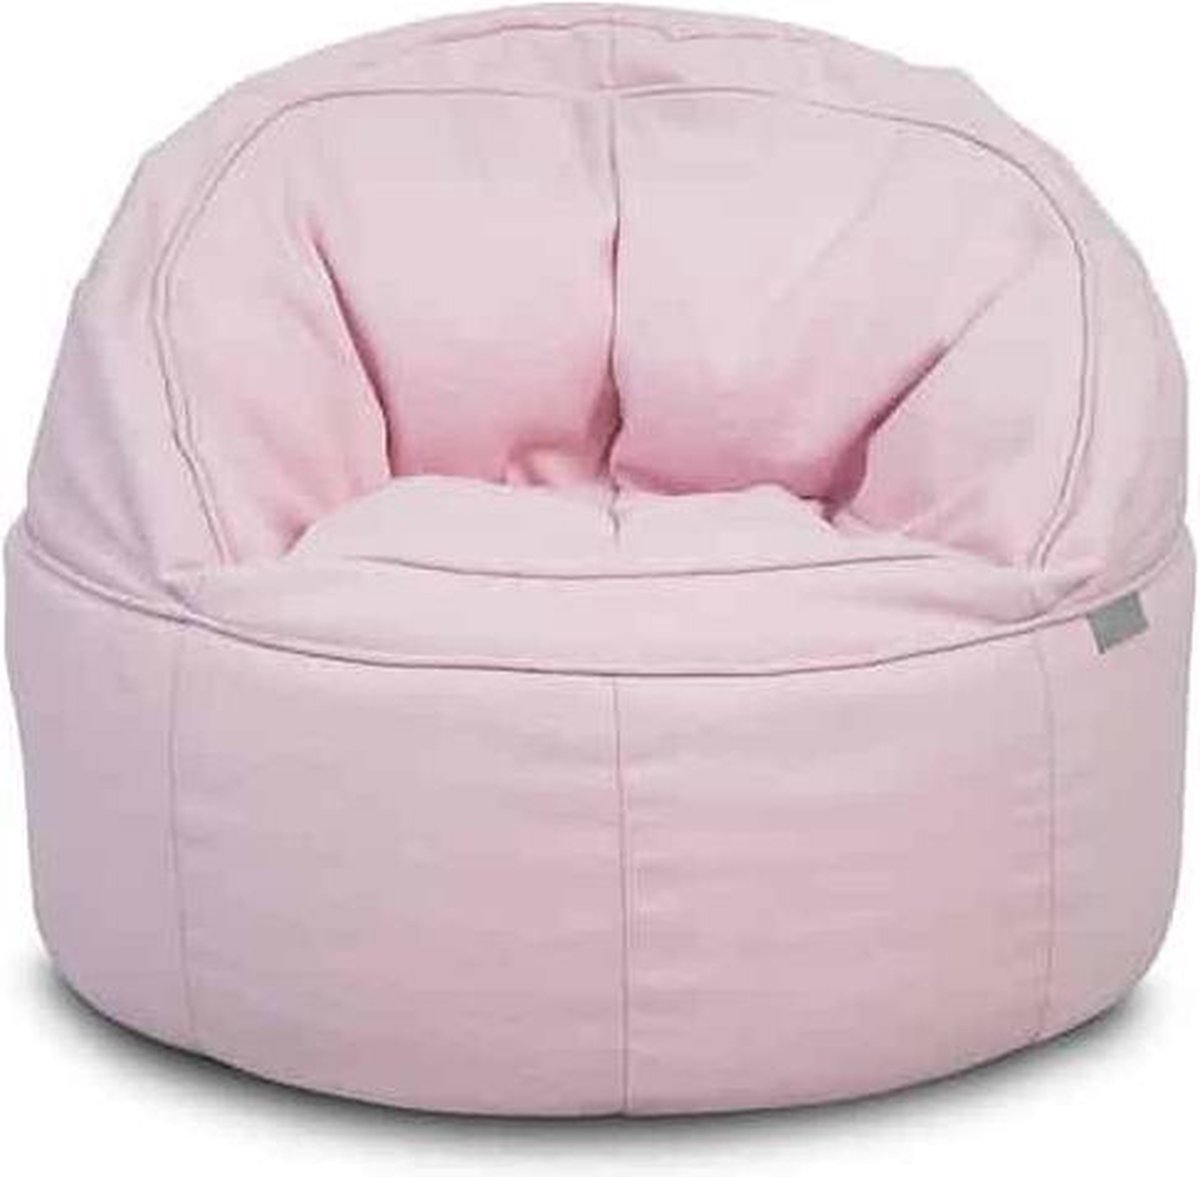 1 Bean Bag Stoelbean Bag Stoel Sofabean Bag Stoel Grote